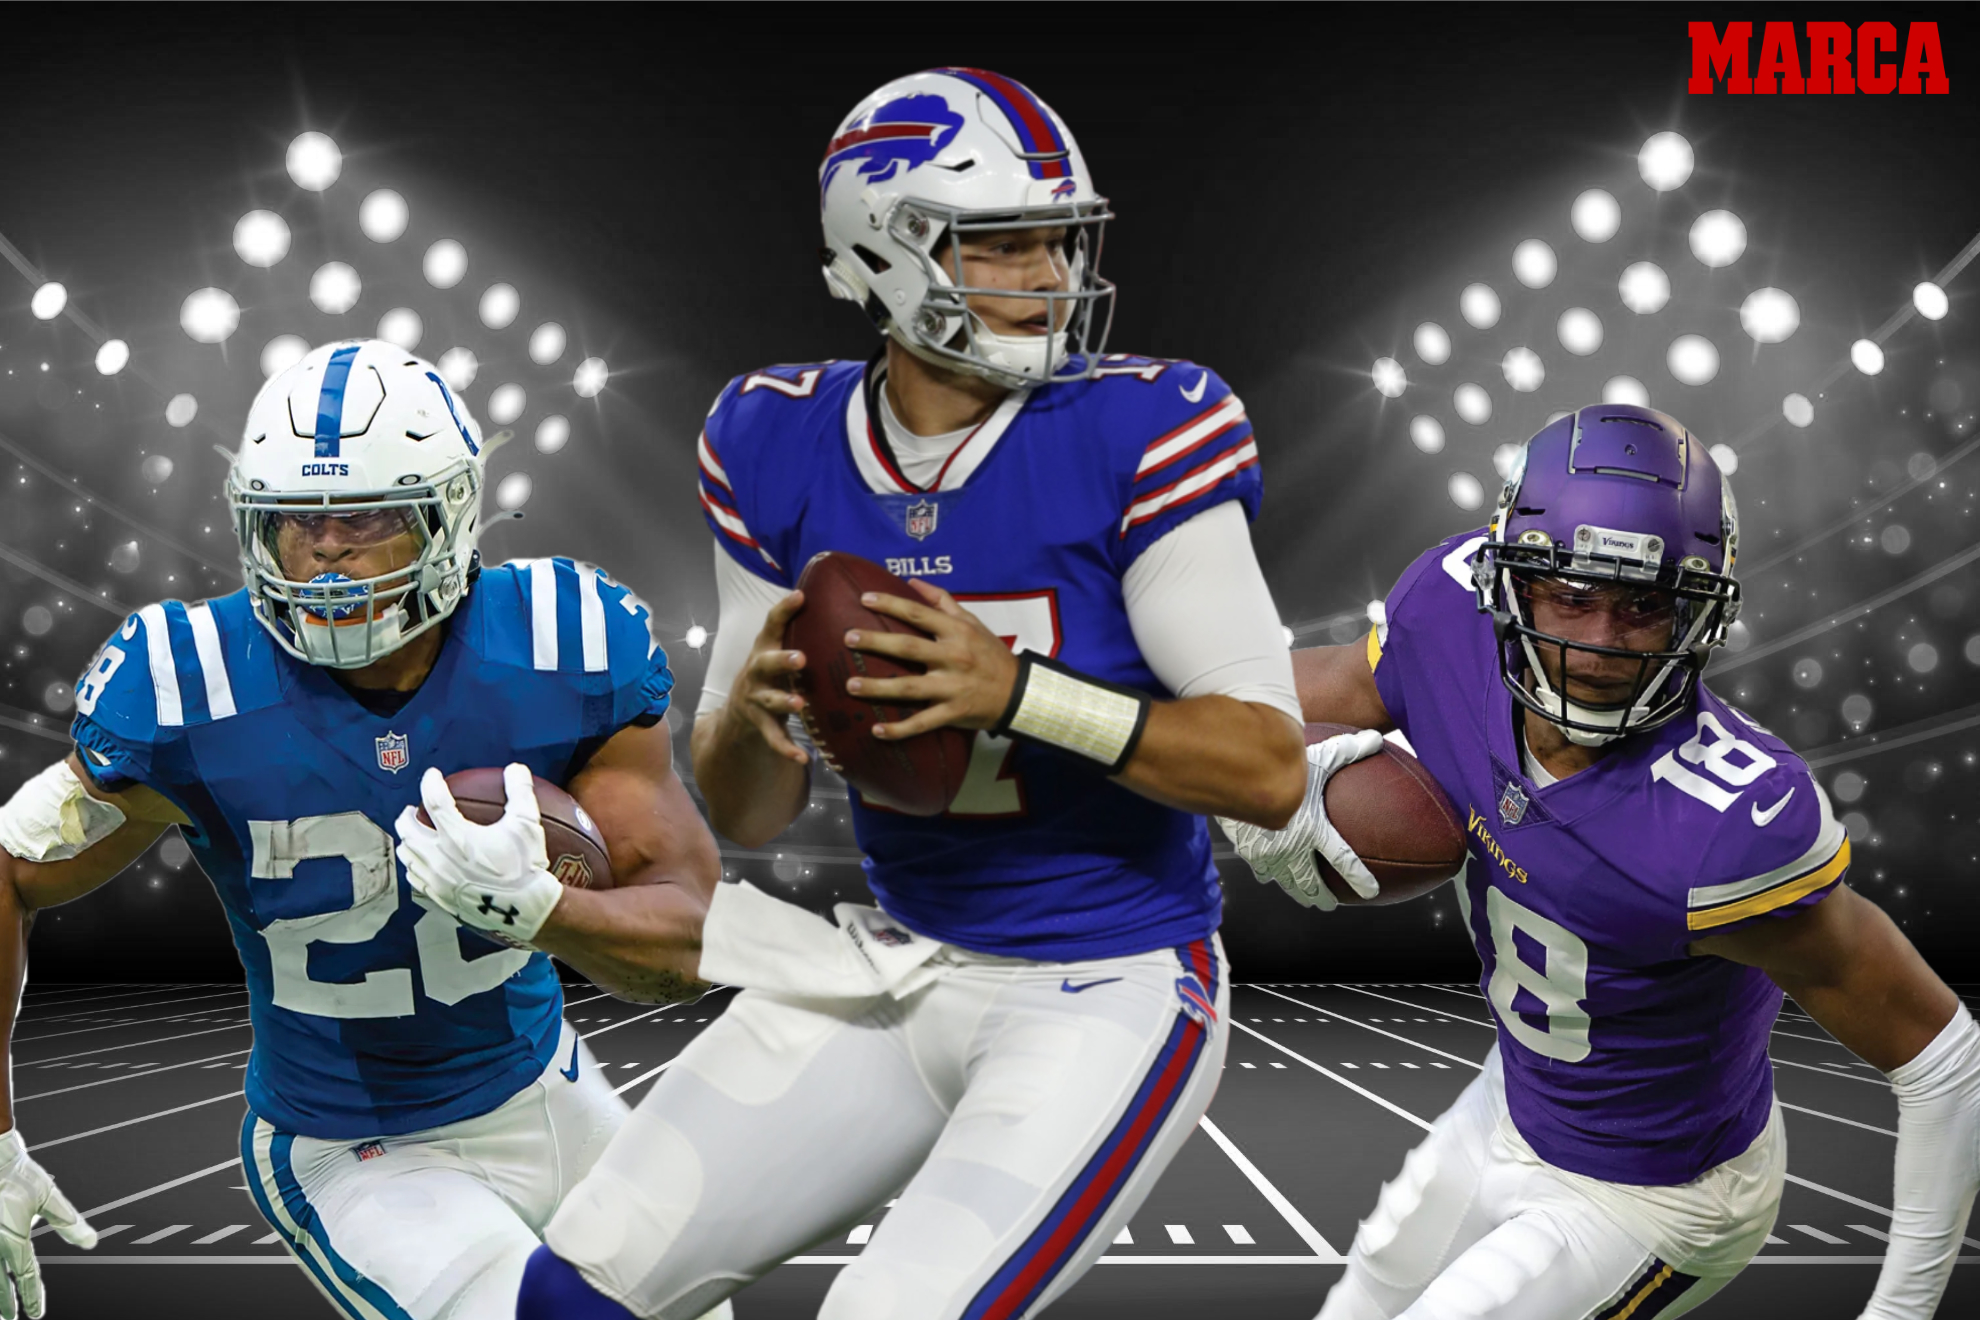 Jonathan Taylor (RB), Josh Allen (QB), and Justin Jefferson (WR) lead this year's NFL Fantasy Draft Class. -MARCA